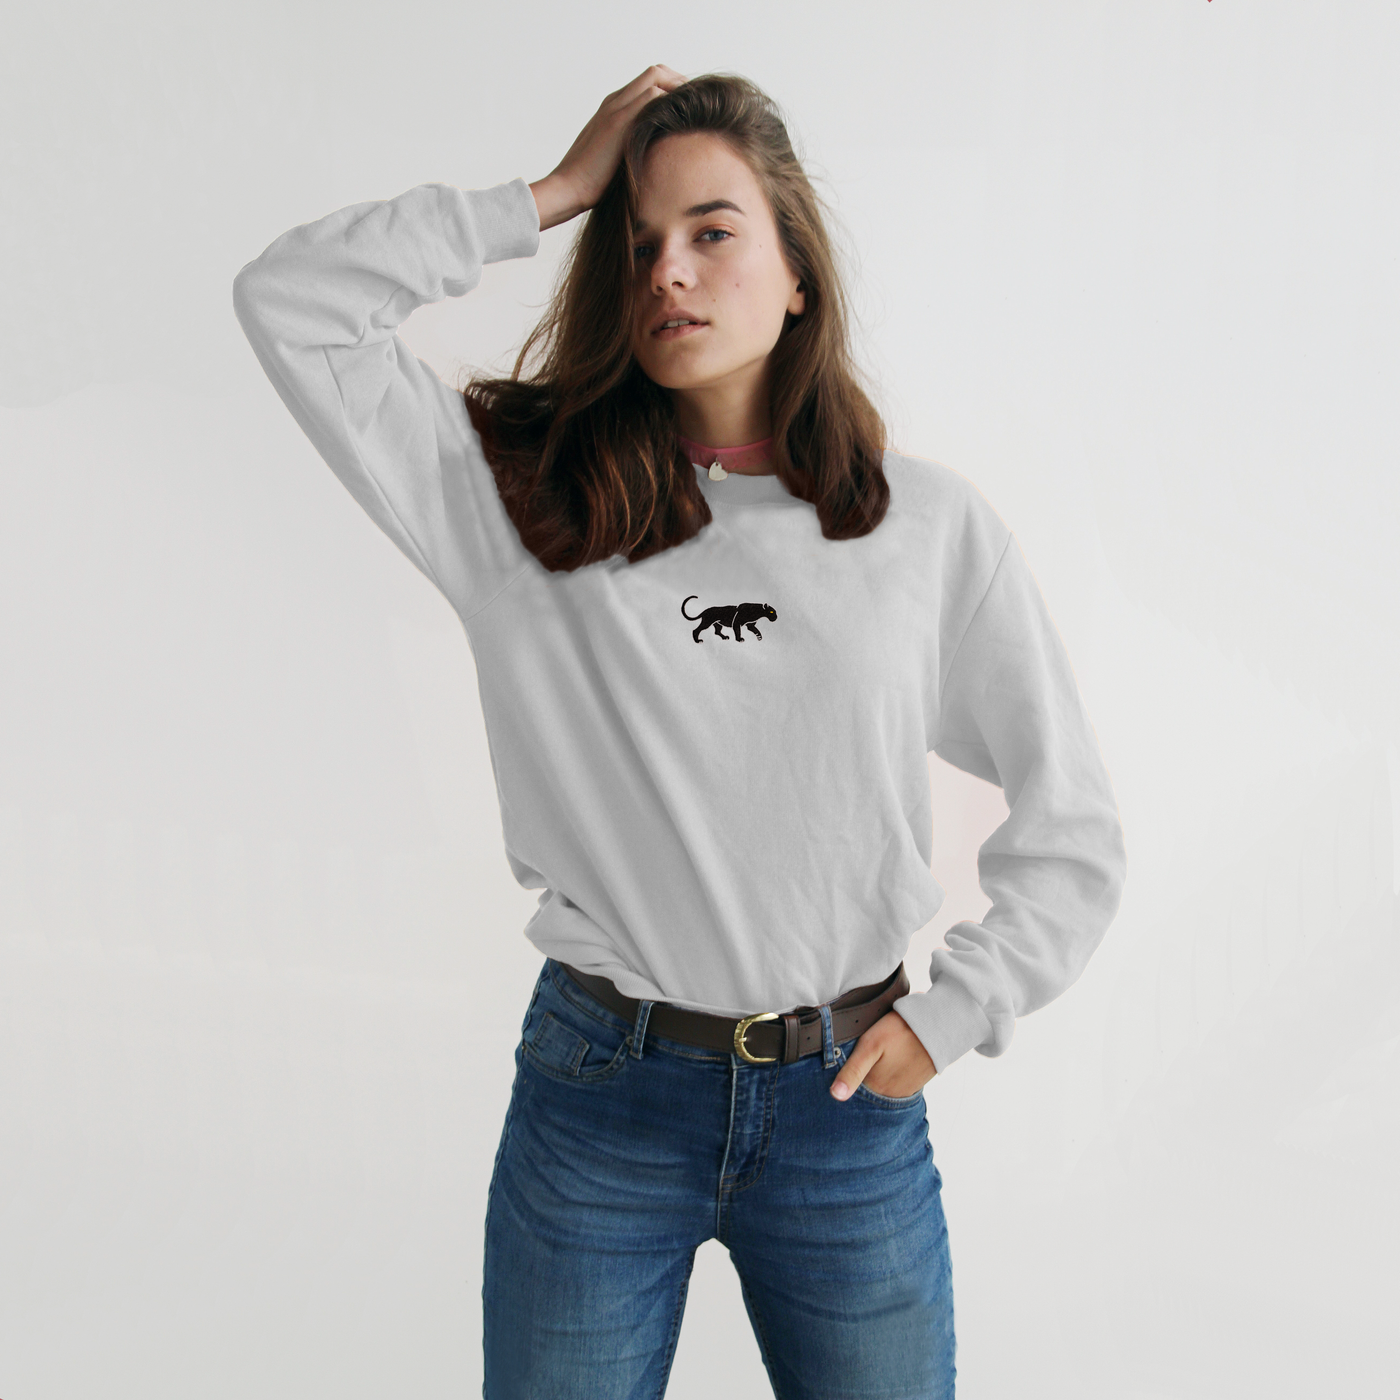 Bobby's Planet Women's Embroidered Black Jaguar Long Sleeve Shirt from South American Amazon Animals Collection in White Color#color_white